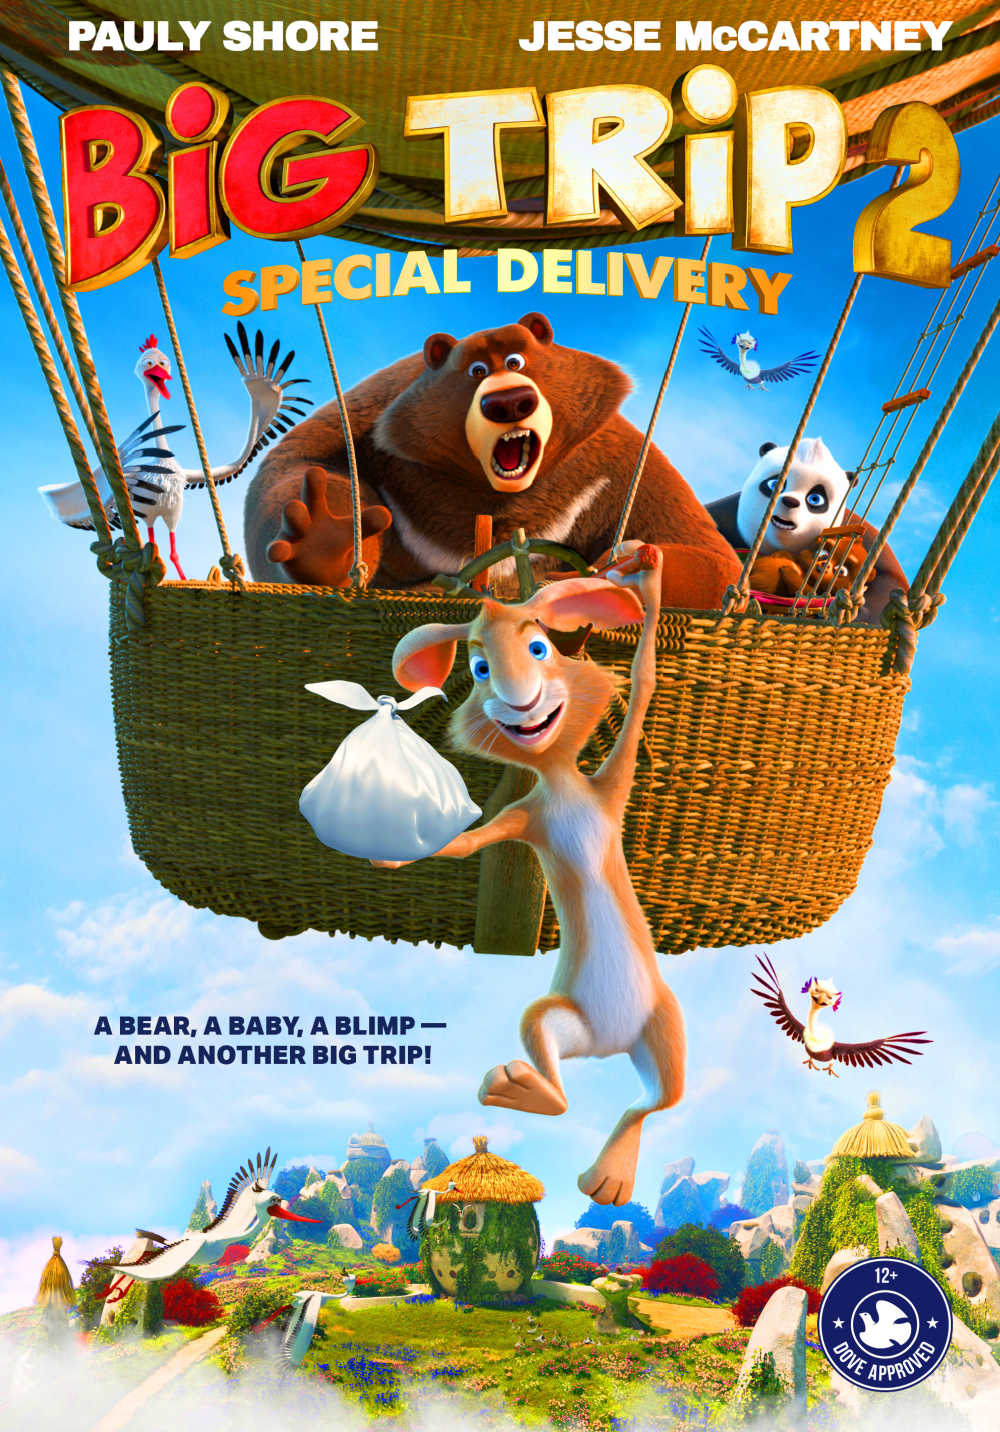 Your family's favorite characters from The Big Trip are back for more fun in the hilarious Big Trip 2: Secret Delivery.